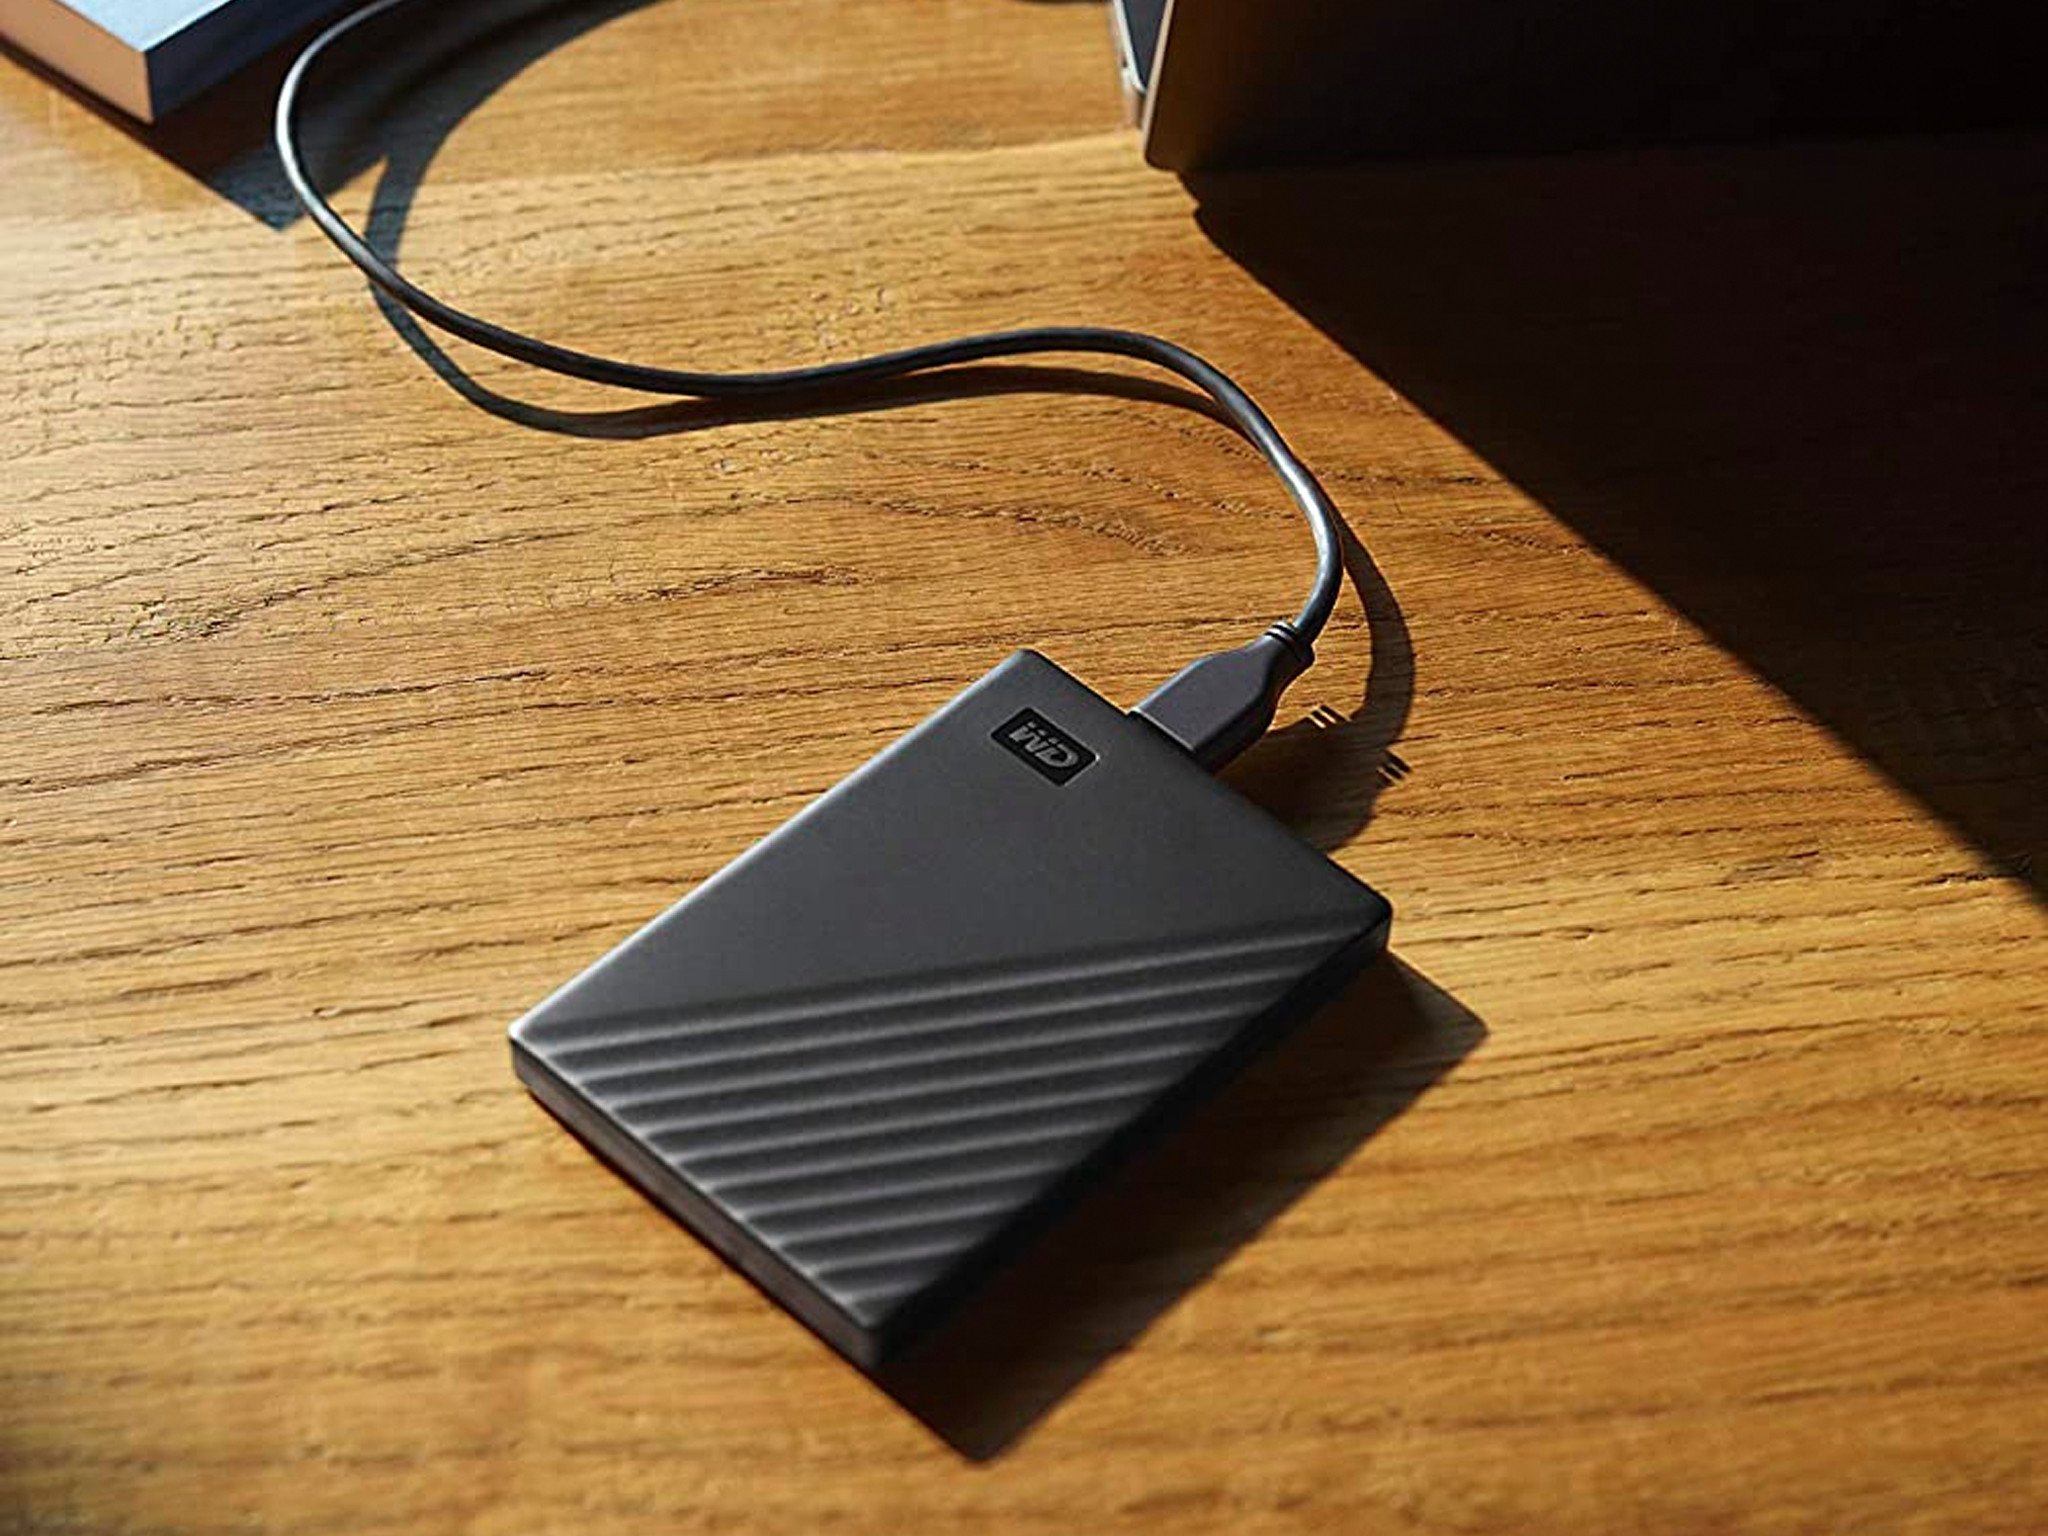 Western Digital S 5tb My Passport External Hard Drive Is Now On Sale For 100 Windows Central